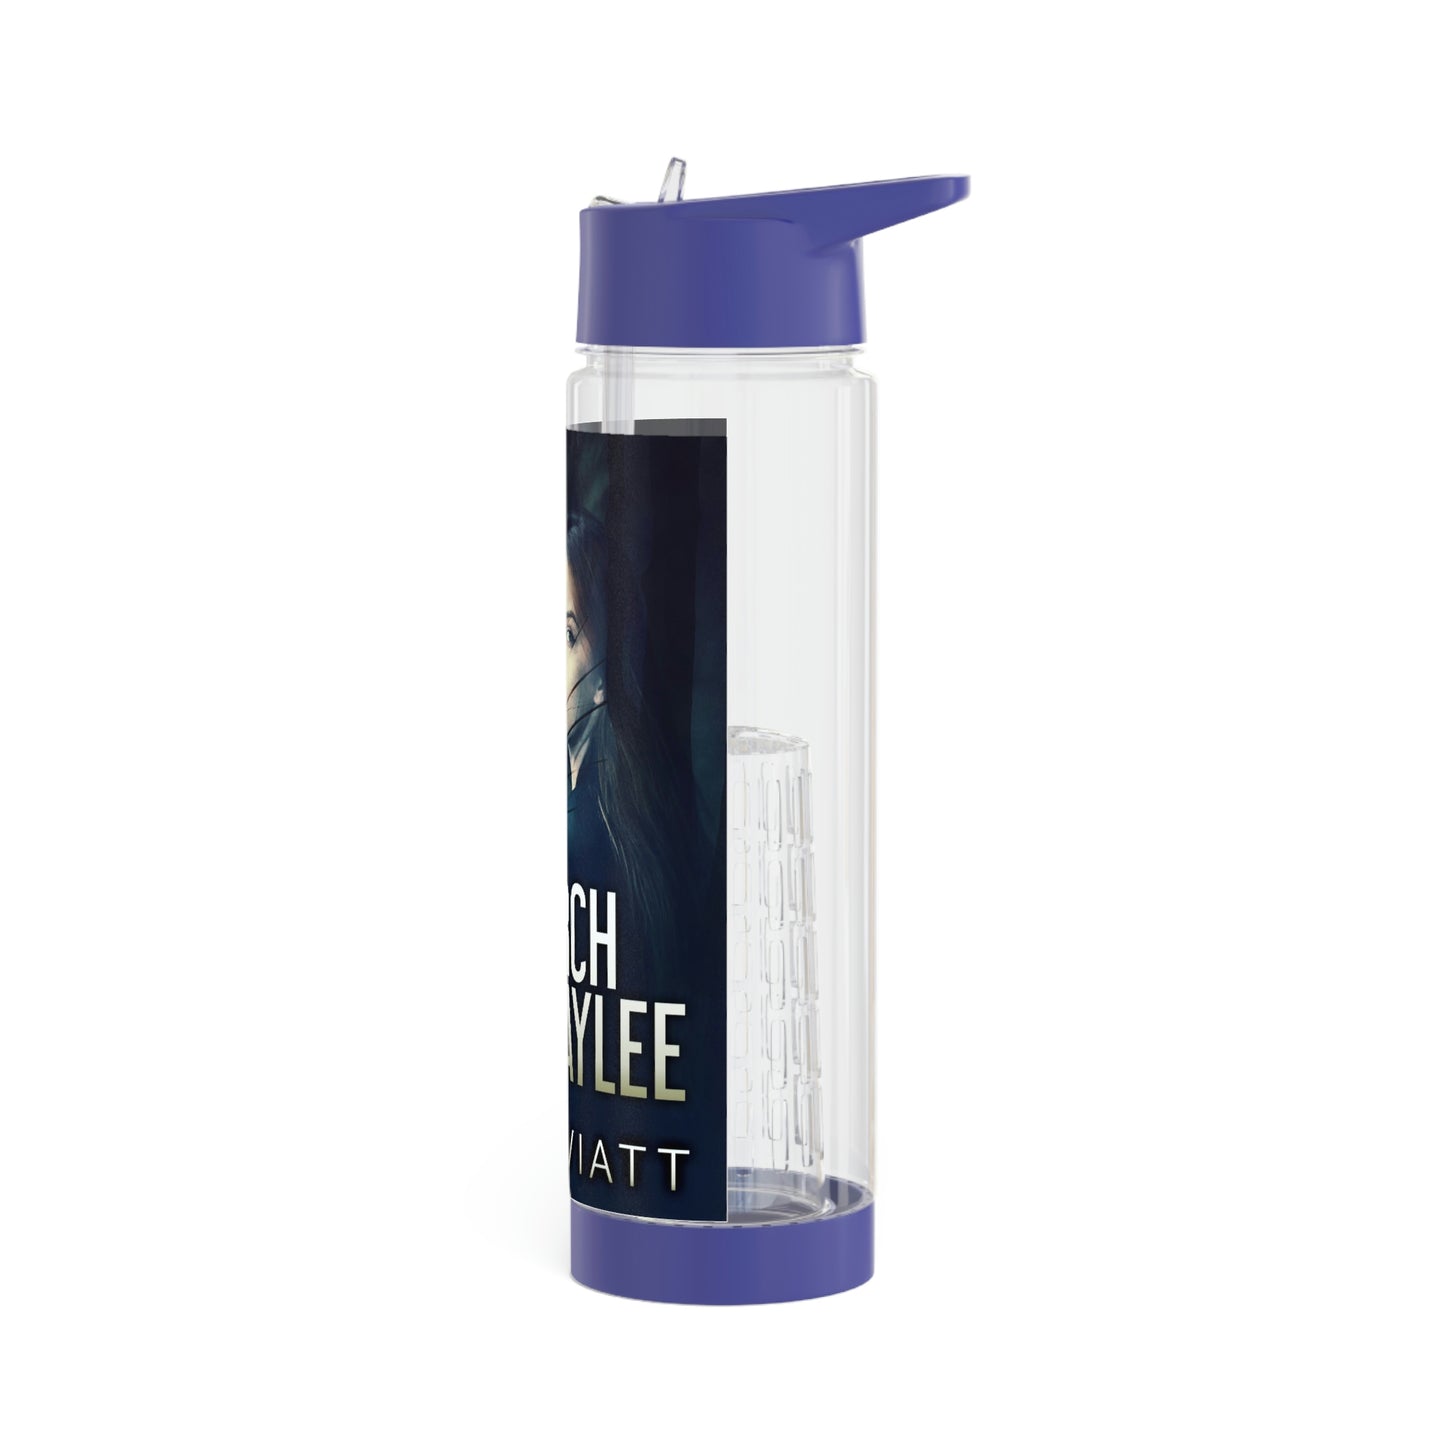 Search for Maylee - Infuser Water Bottle